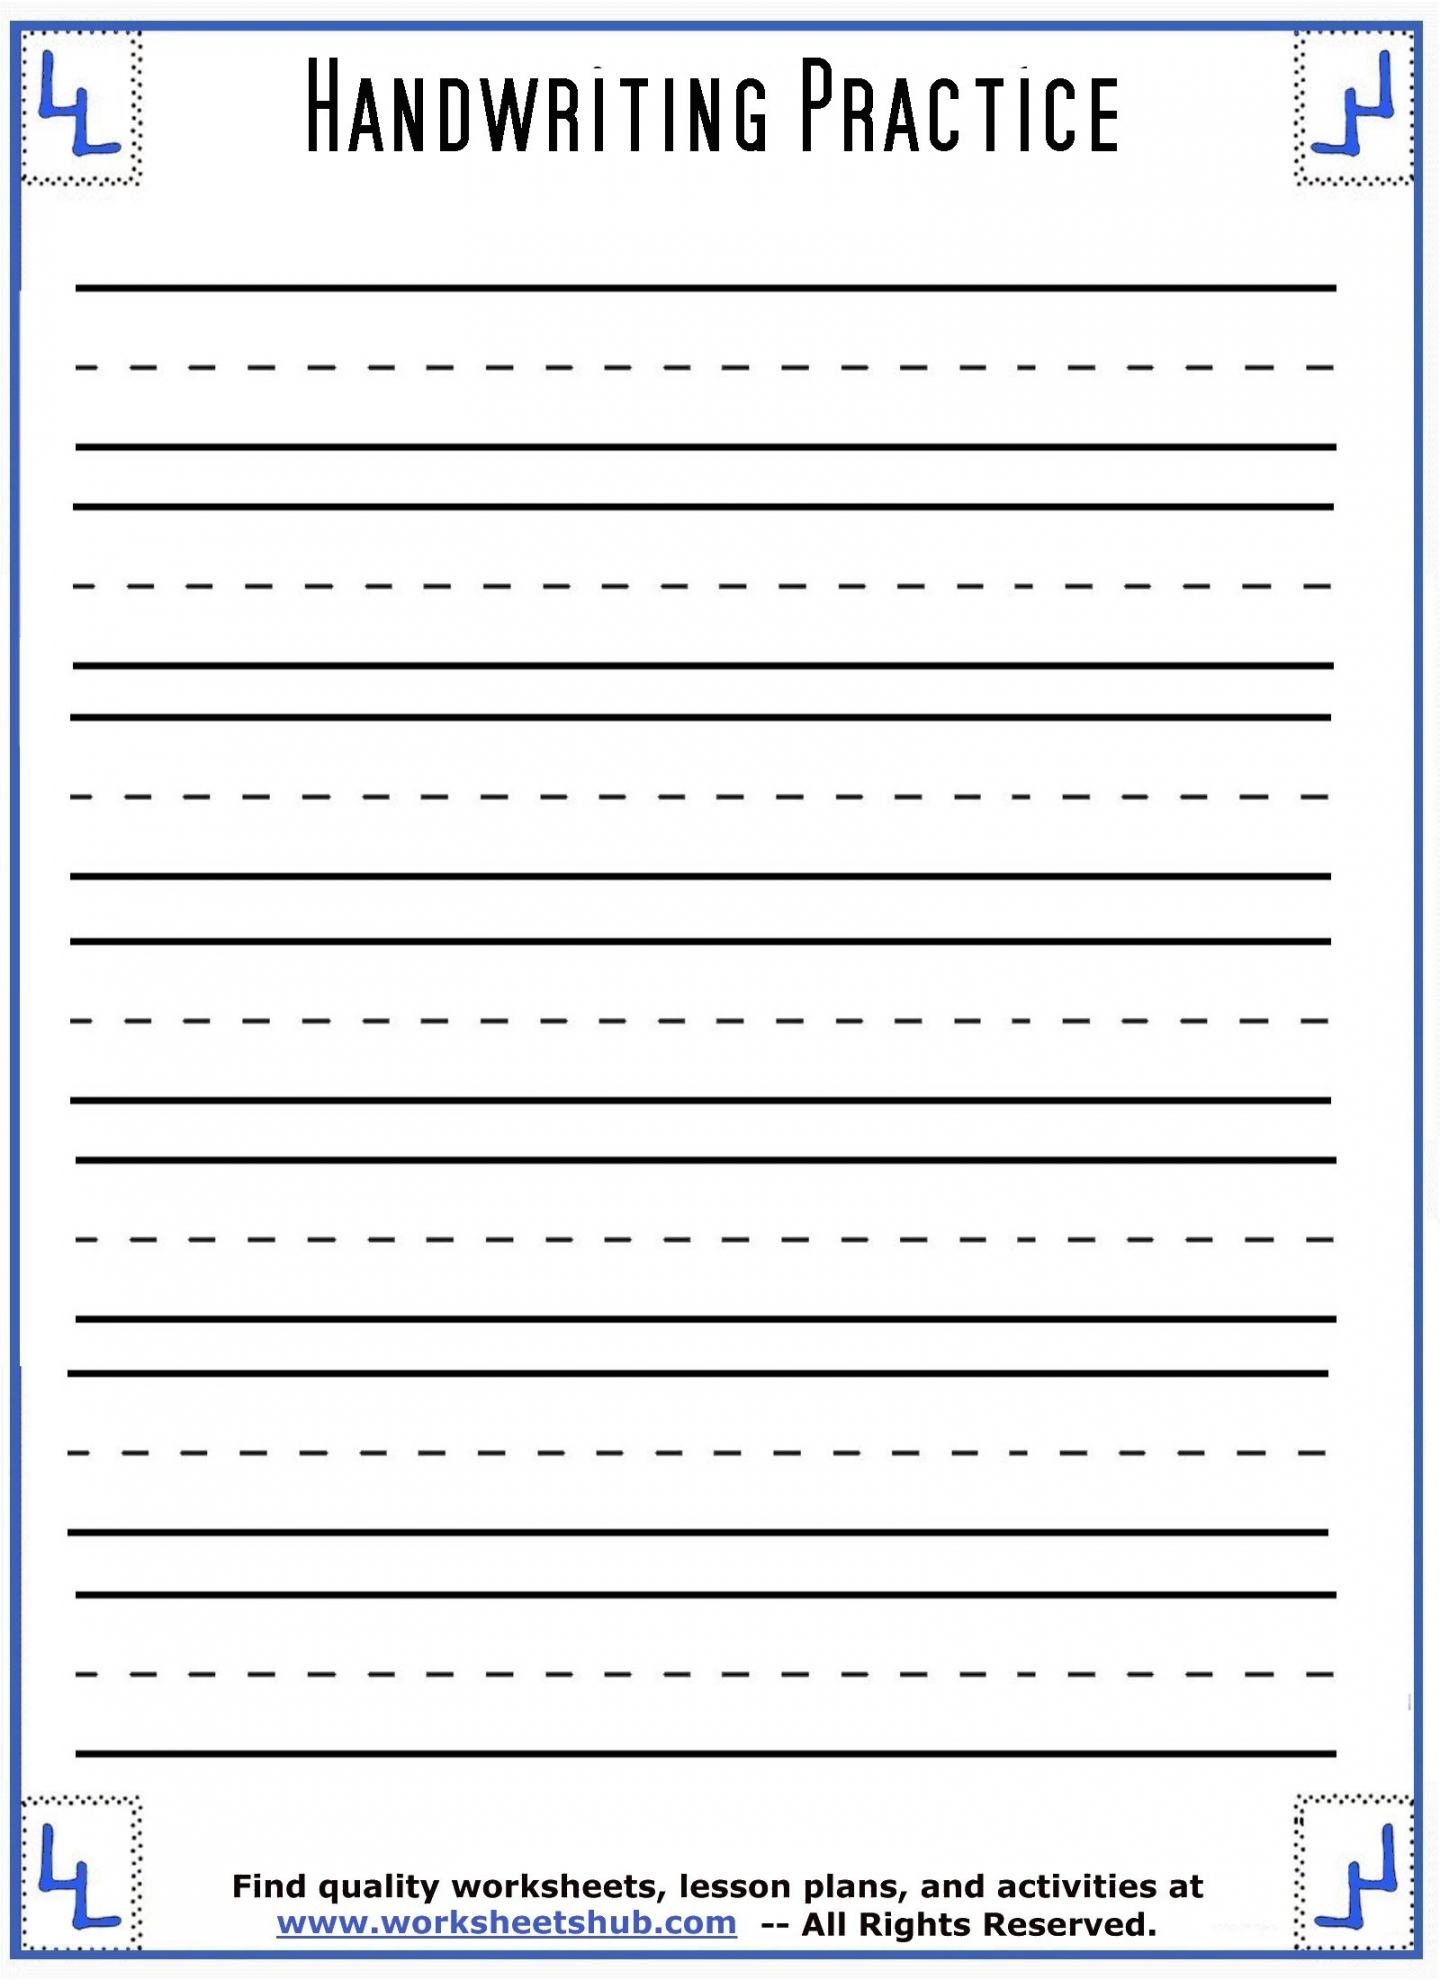 Handwriting Sheets:Printable -Lined Paper - FREE Printables - Handwriting Pages Printable